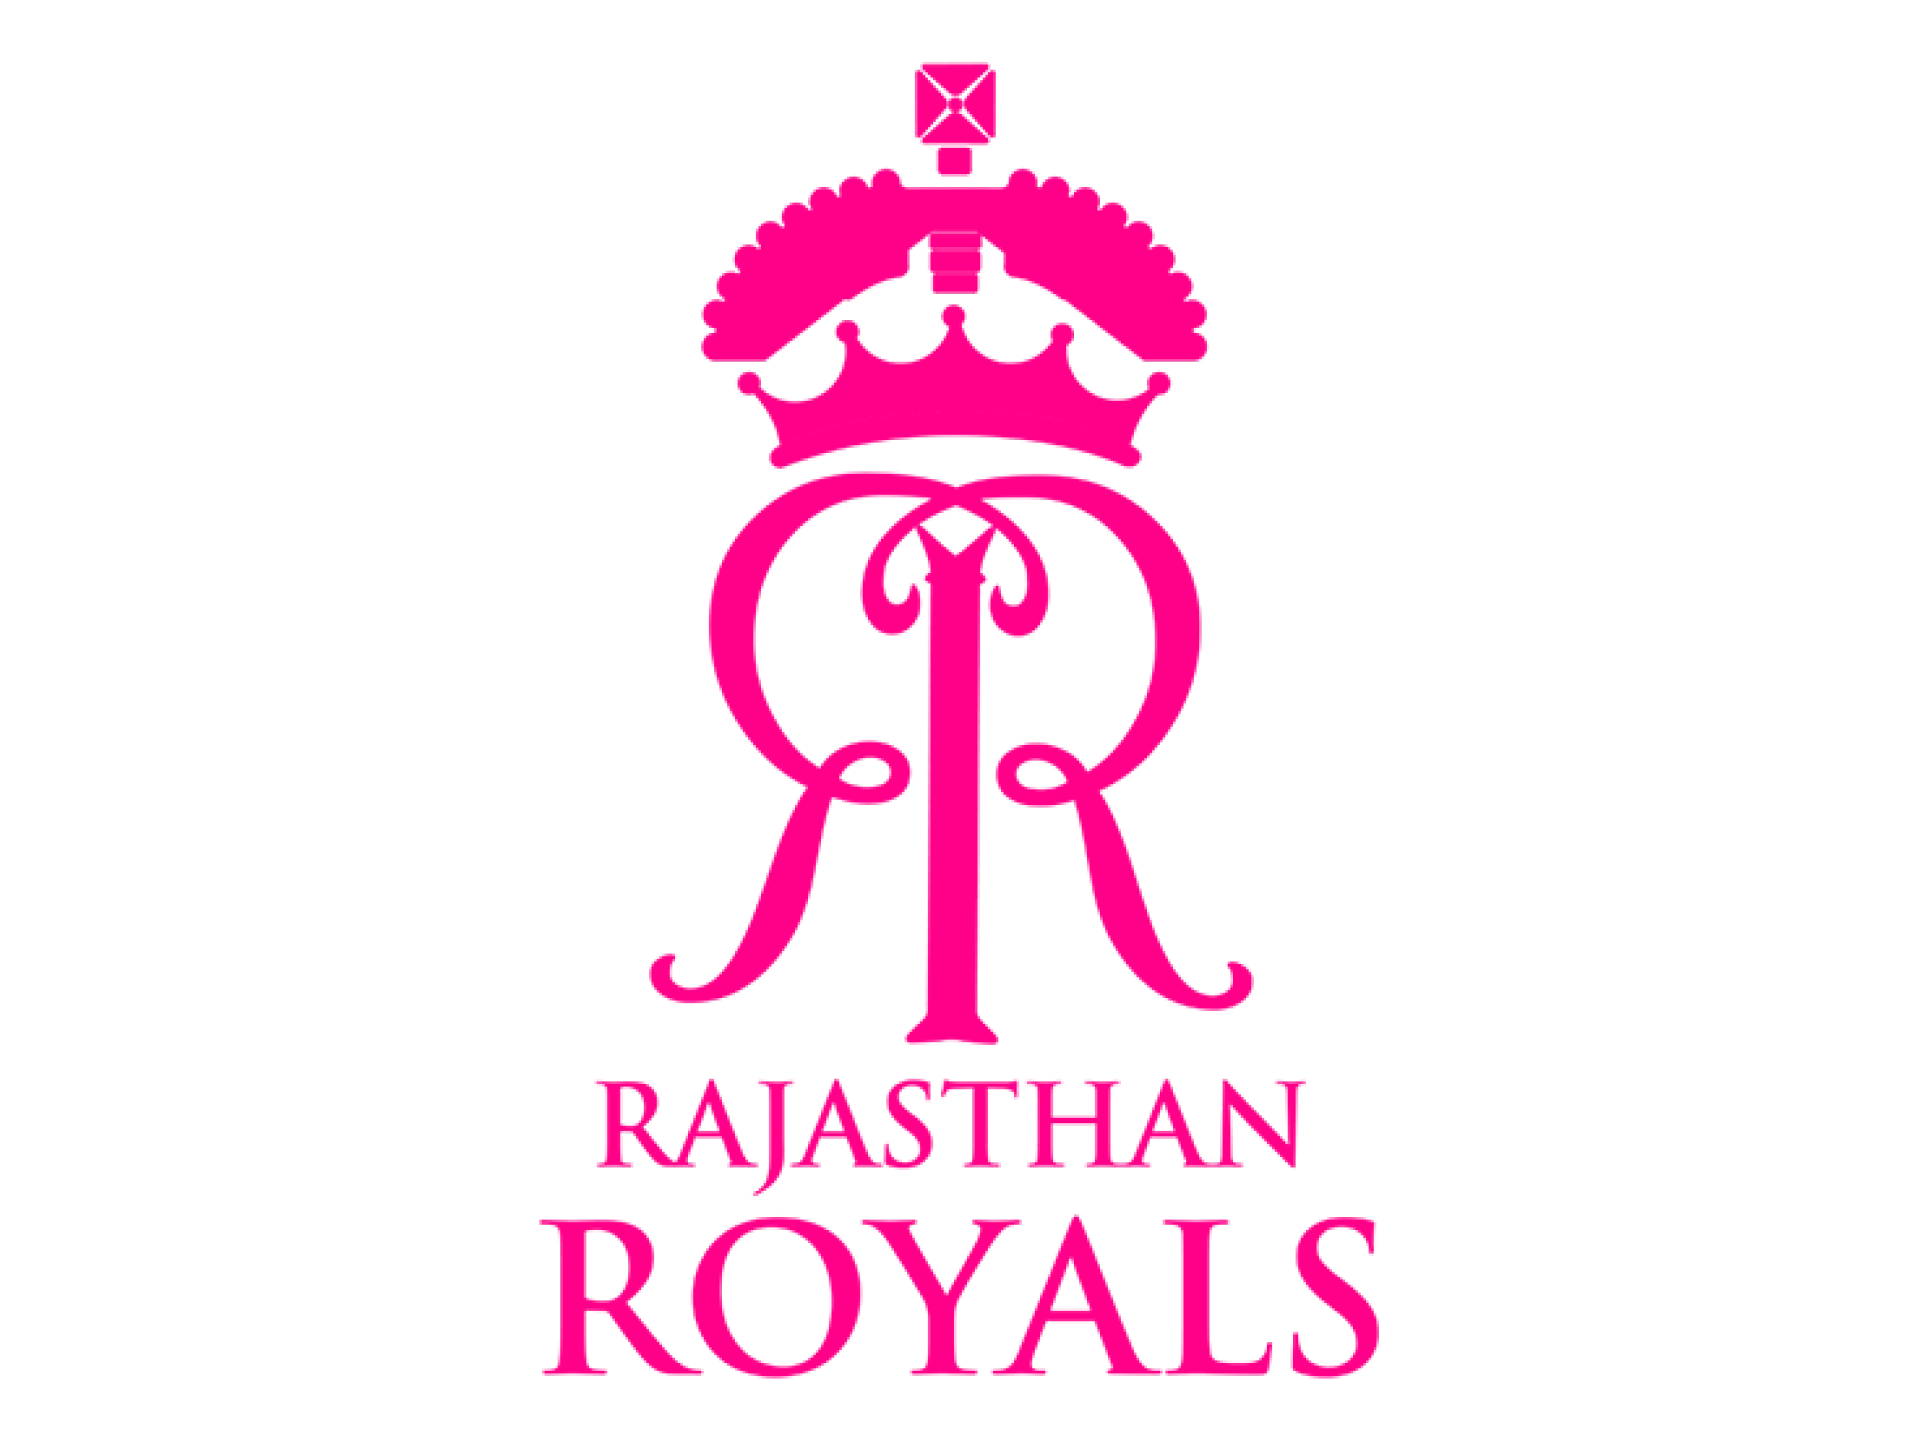 Try betting on Rajasthan Royals in an IPL match.